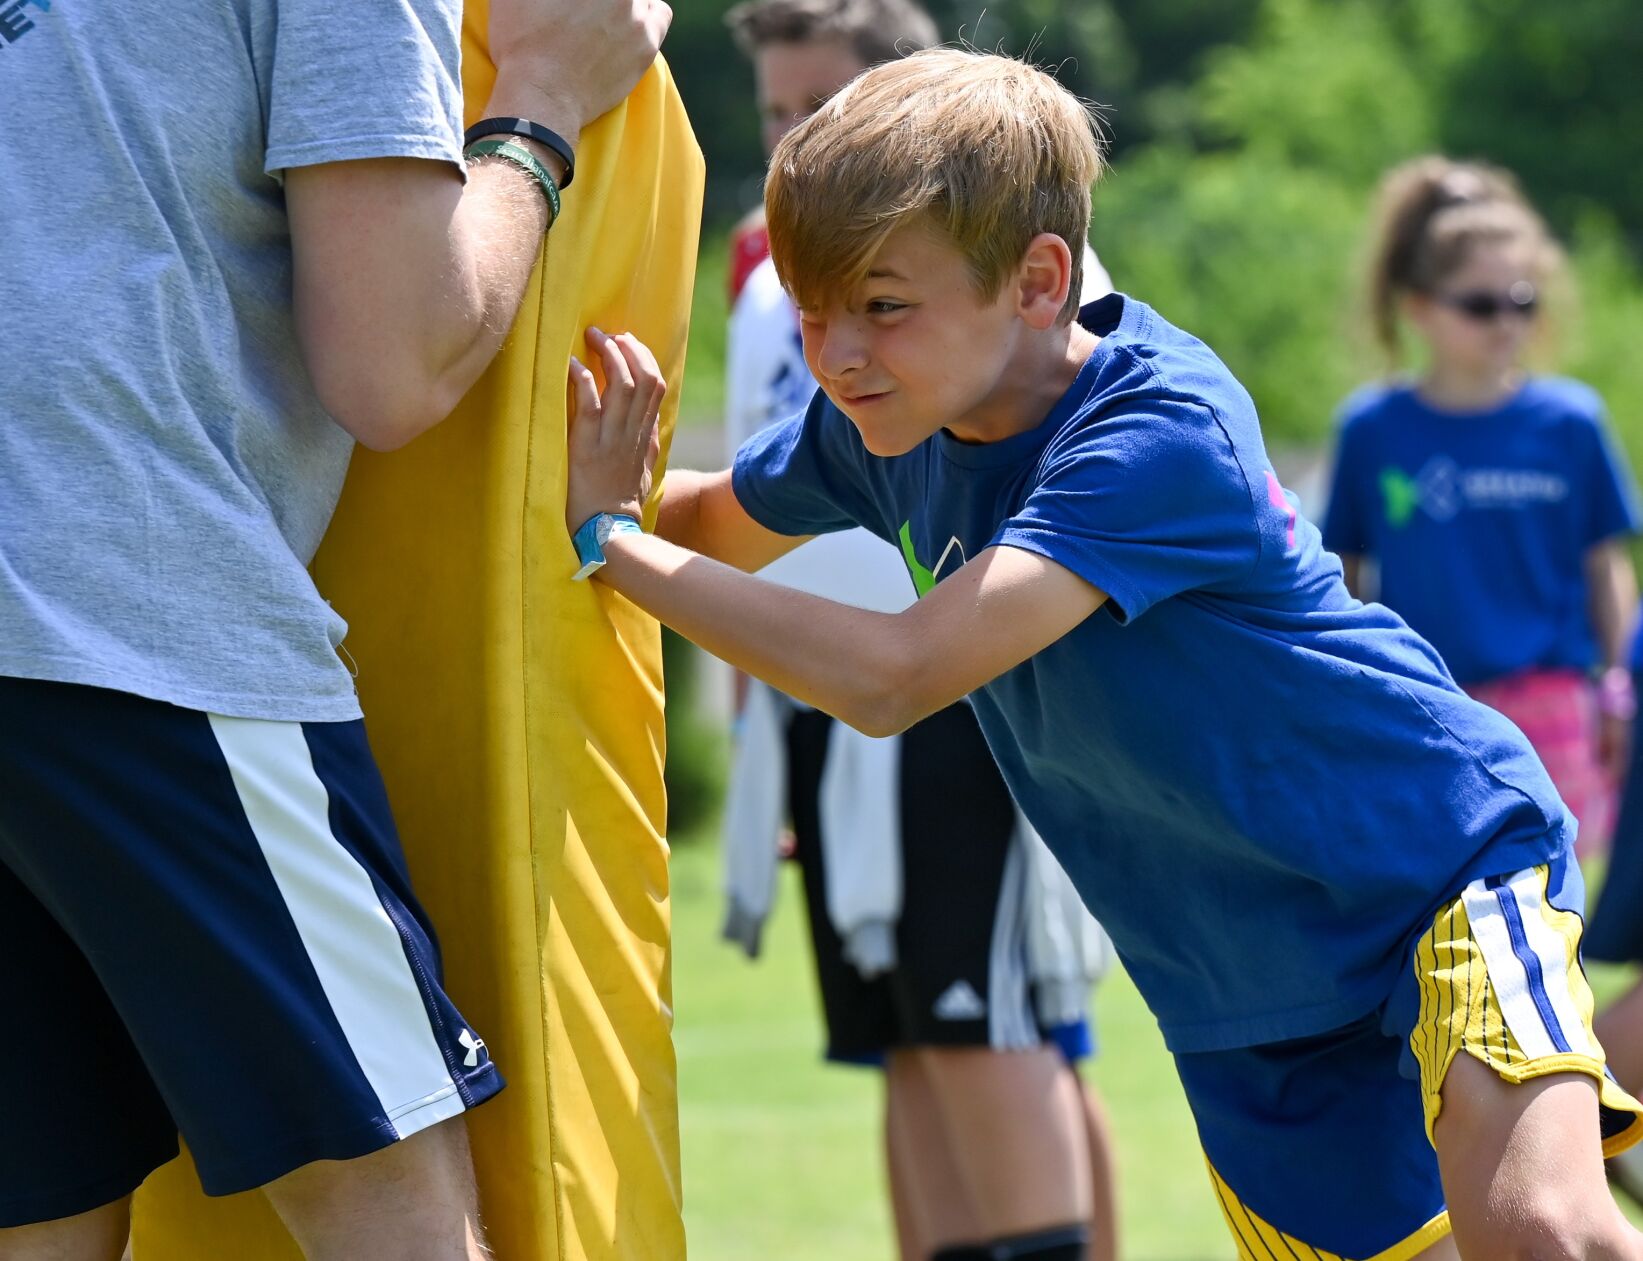 FCA Power Camp offers sports, spiritual training to local children